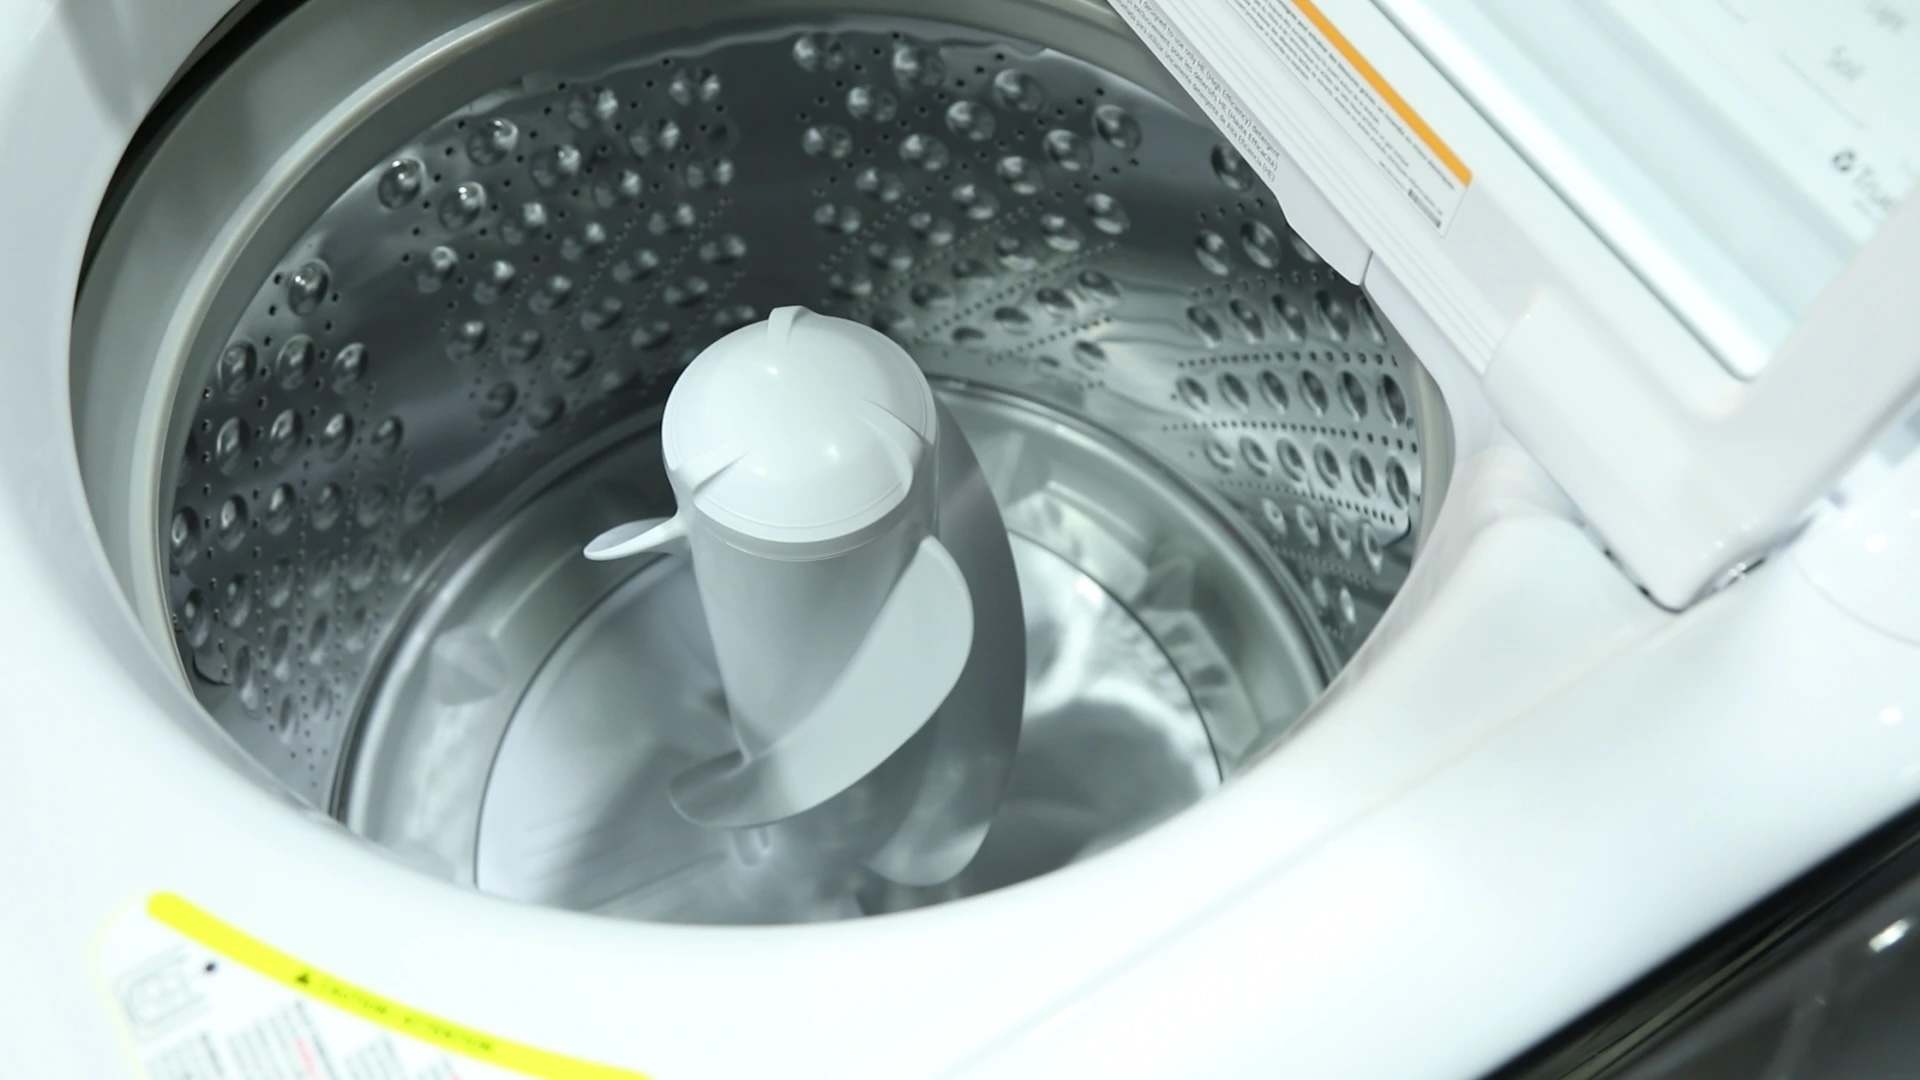 What Is The Middle Part Of A Washing Machine Called